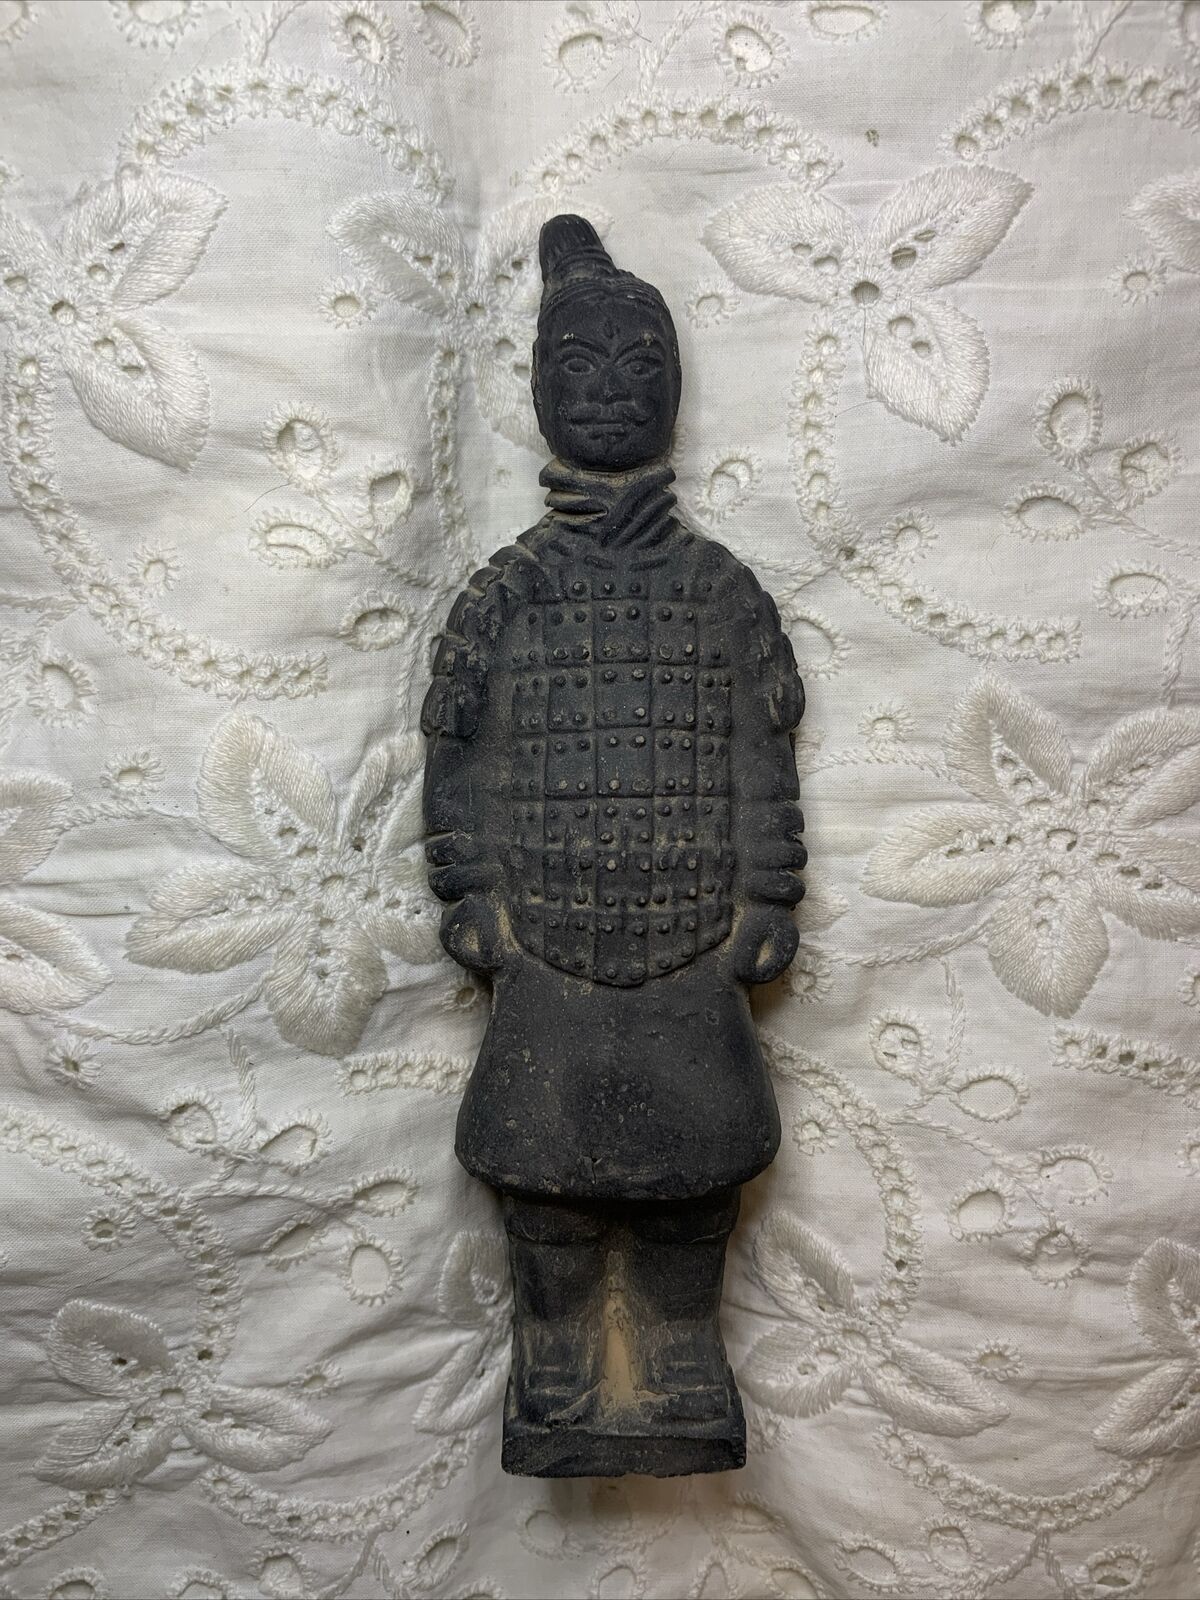 Vintage Reproduction Figurine Chinese Warrior Qin Shi Huang Terra Cotta